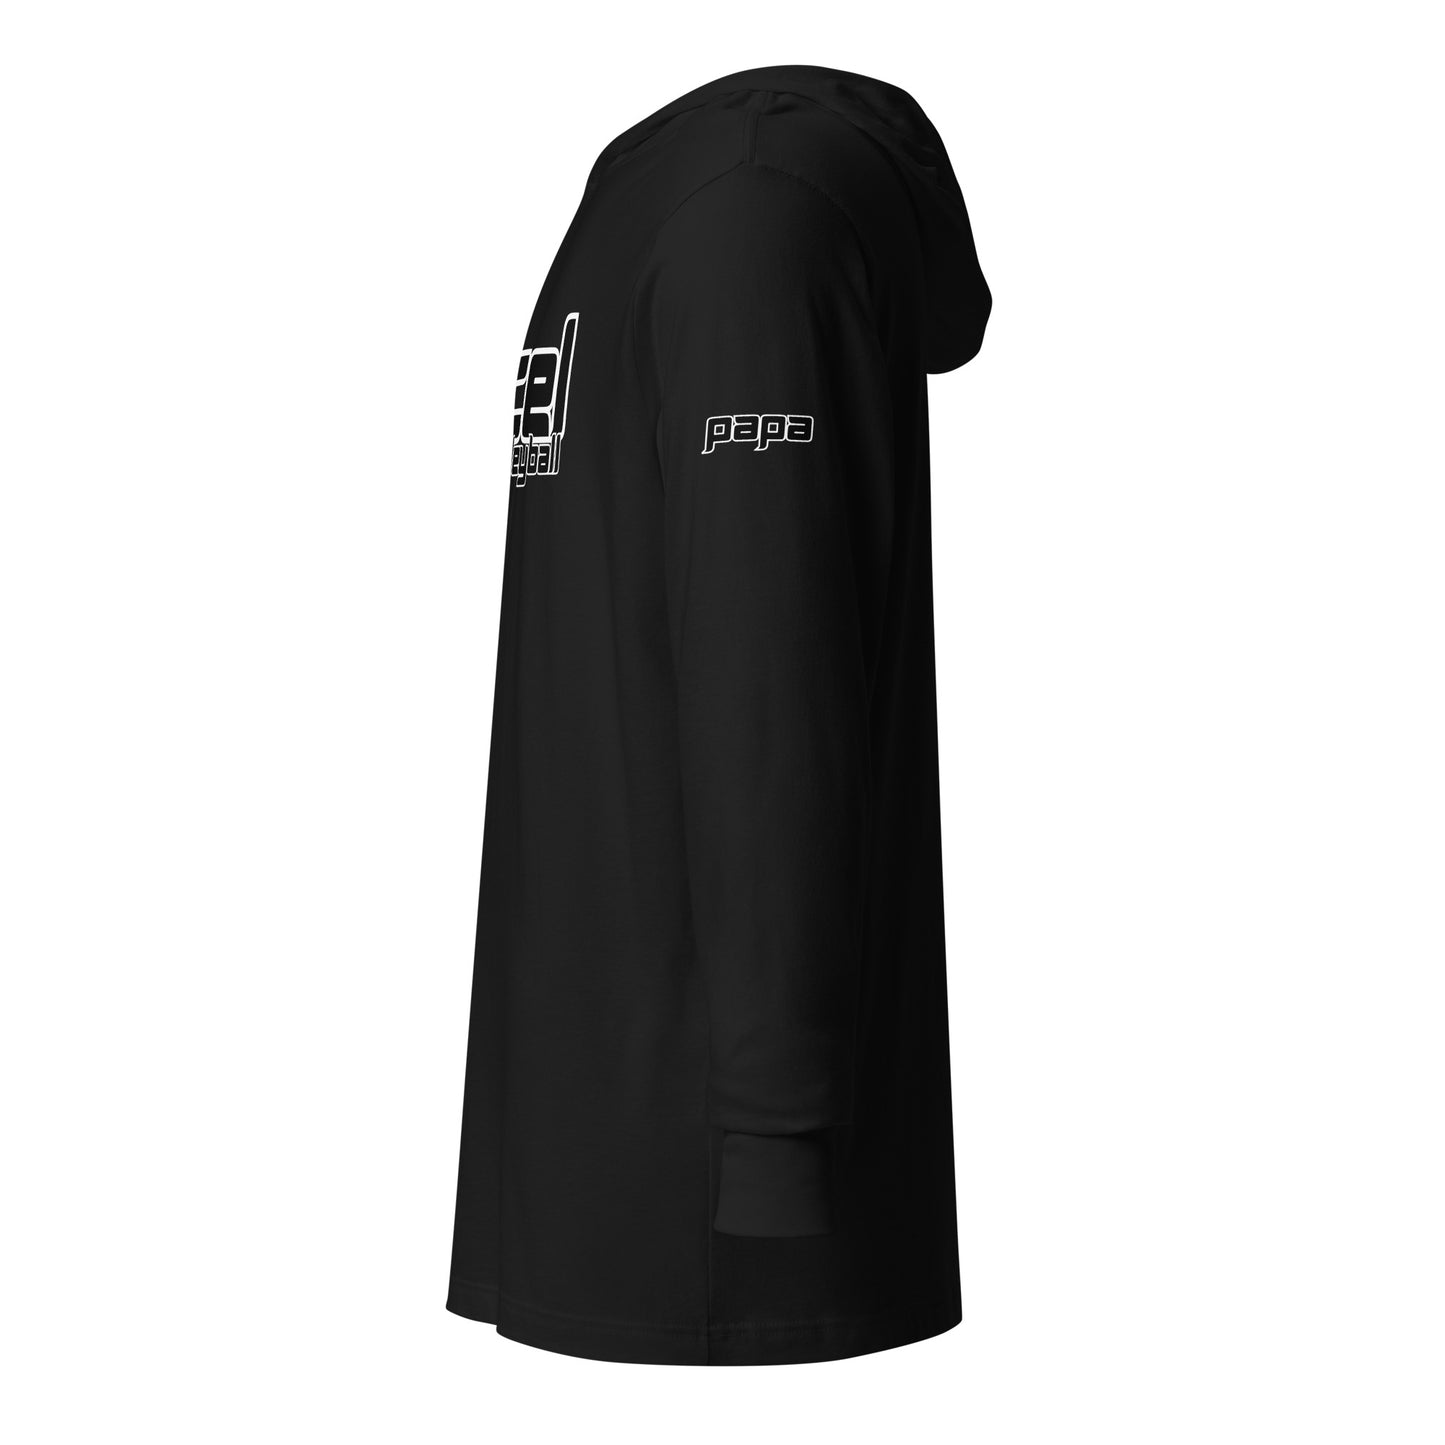 Excel - PAPA - Boys Volleyball Hooded long-sleeve tee